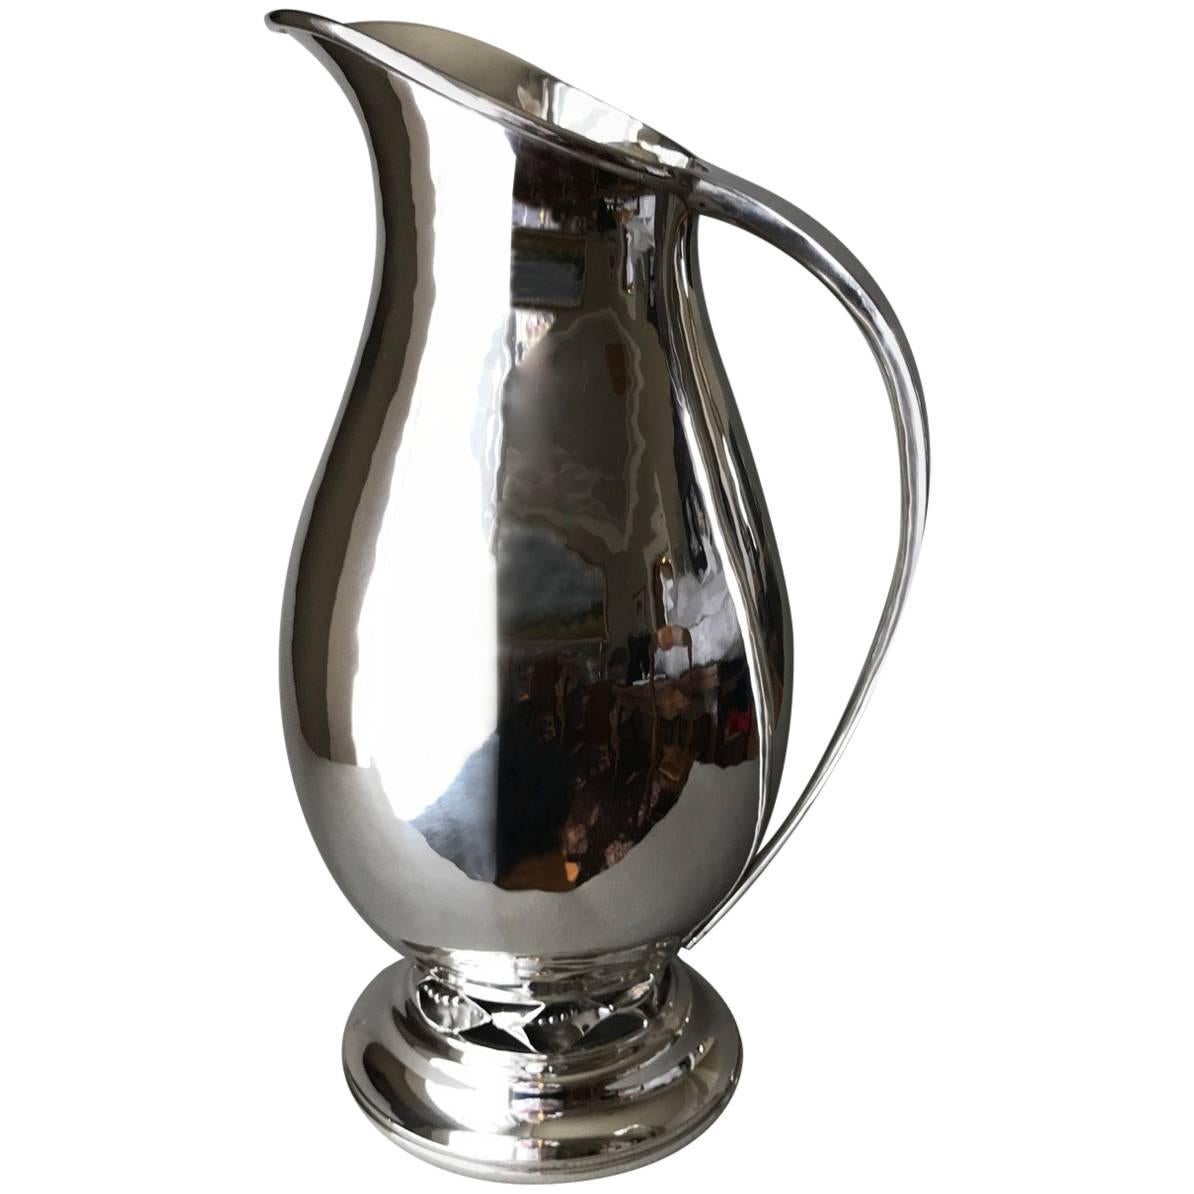 DeMatteo Studio Hand-Wrought Sterling Silver Pitcher For Sale